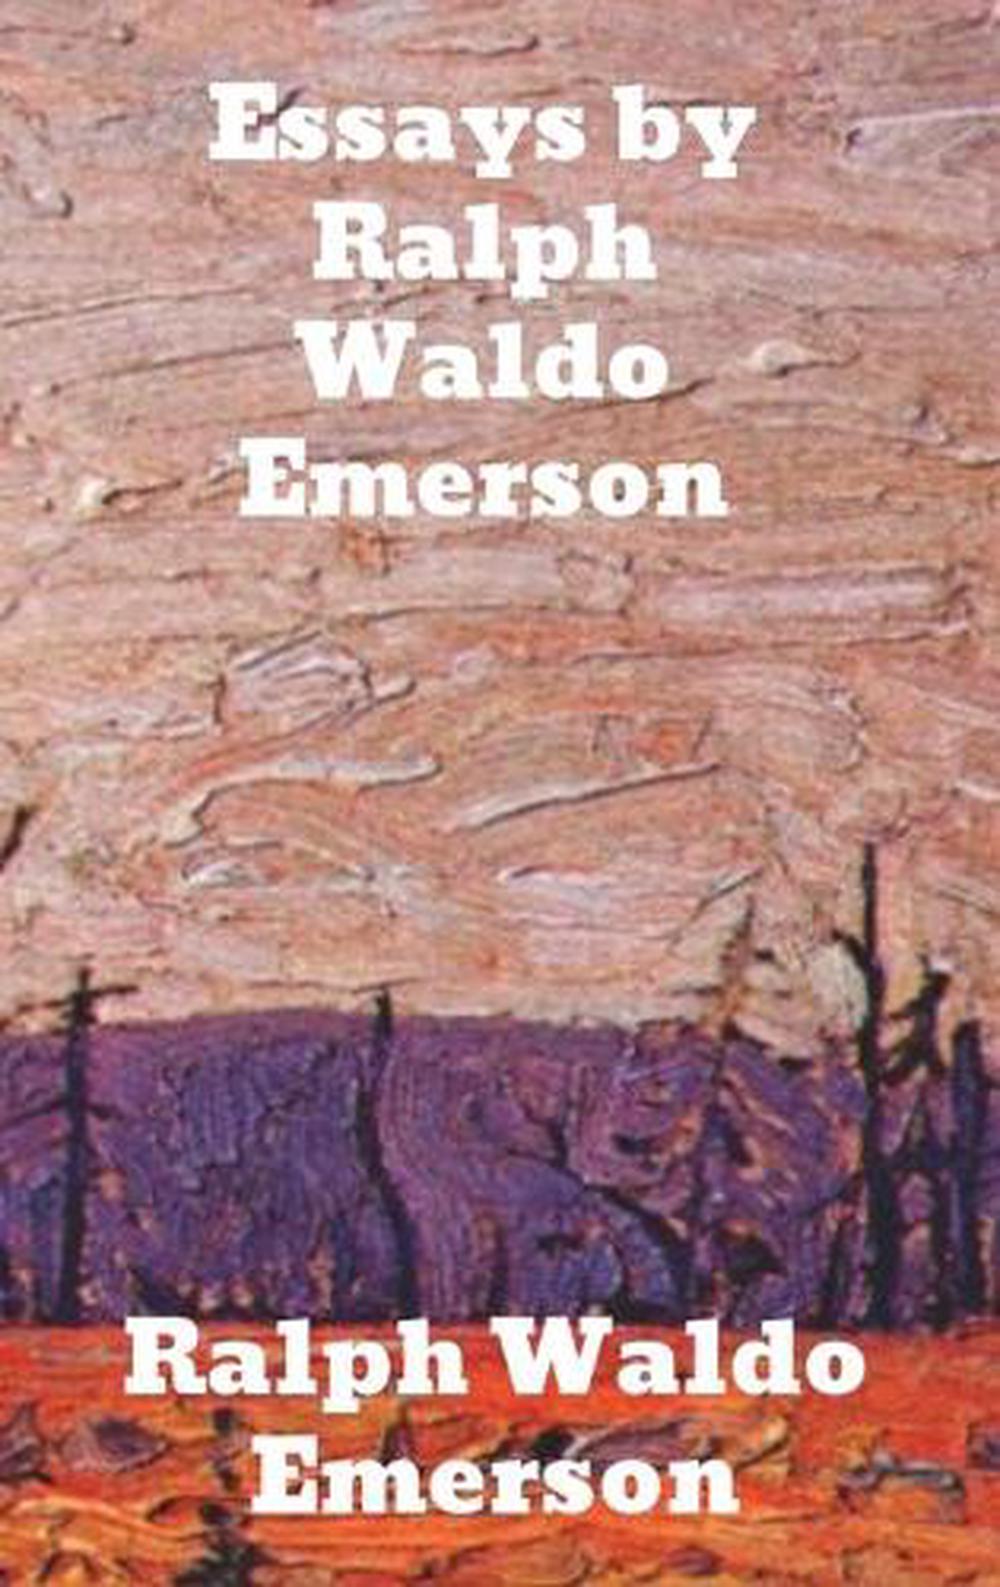 what is ralph waldo emerson's most famous essay